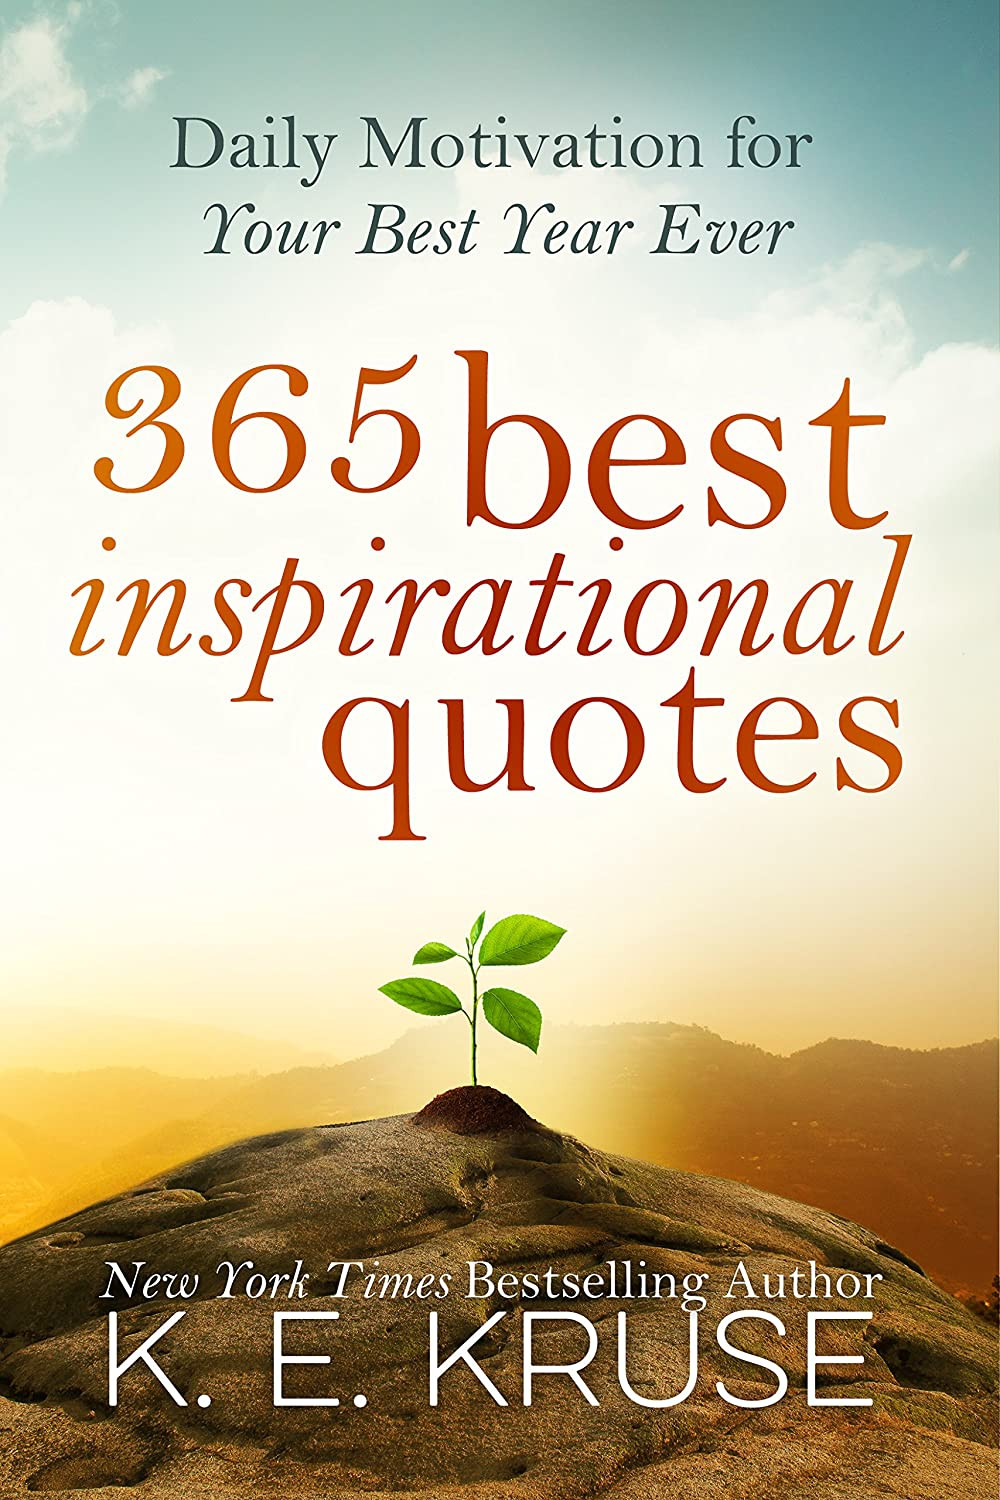 Daily Motivational Quote
 AMAZON KINDLE BOOK PROMOTION 365 Best Inspirational